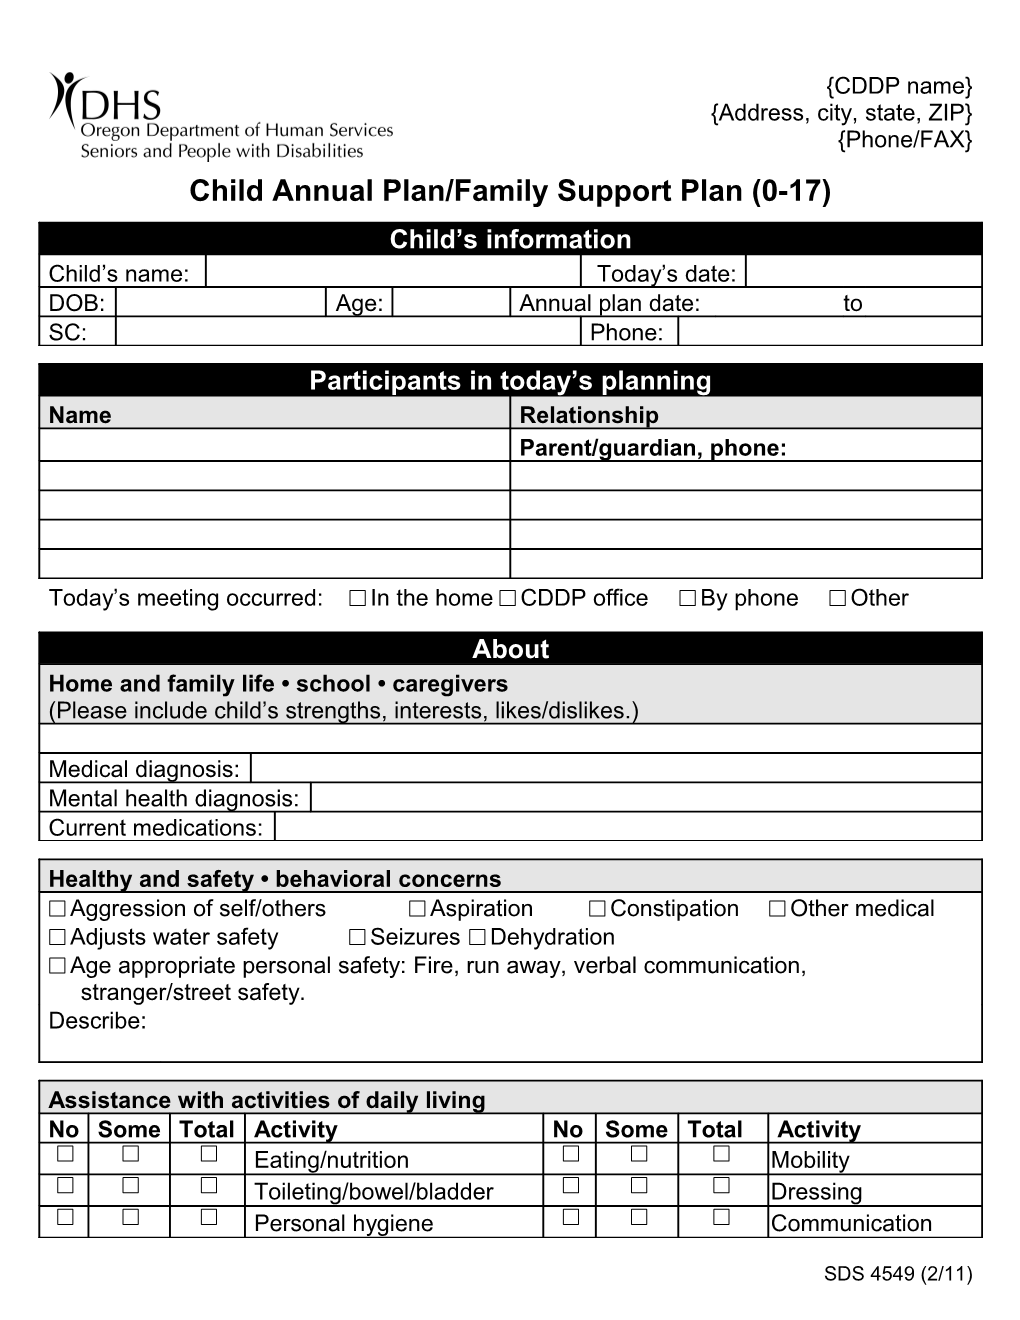 Child Annual Plan/Family Support Plan (0-17)